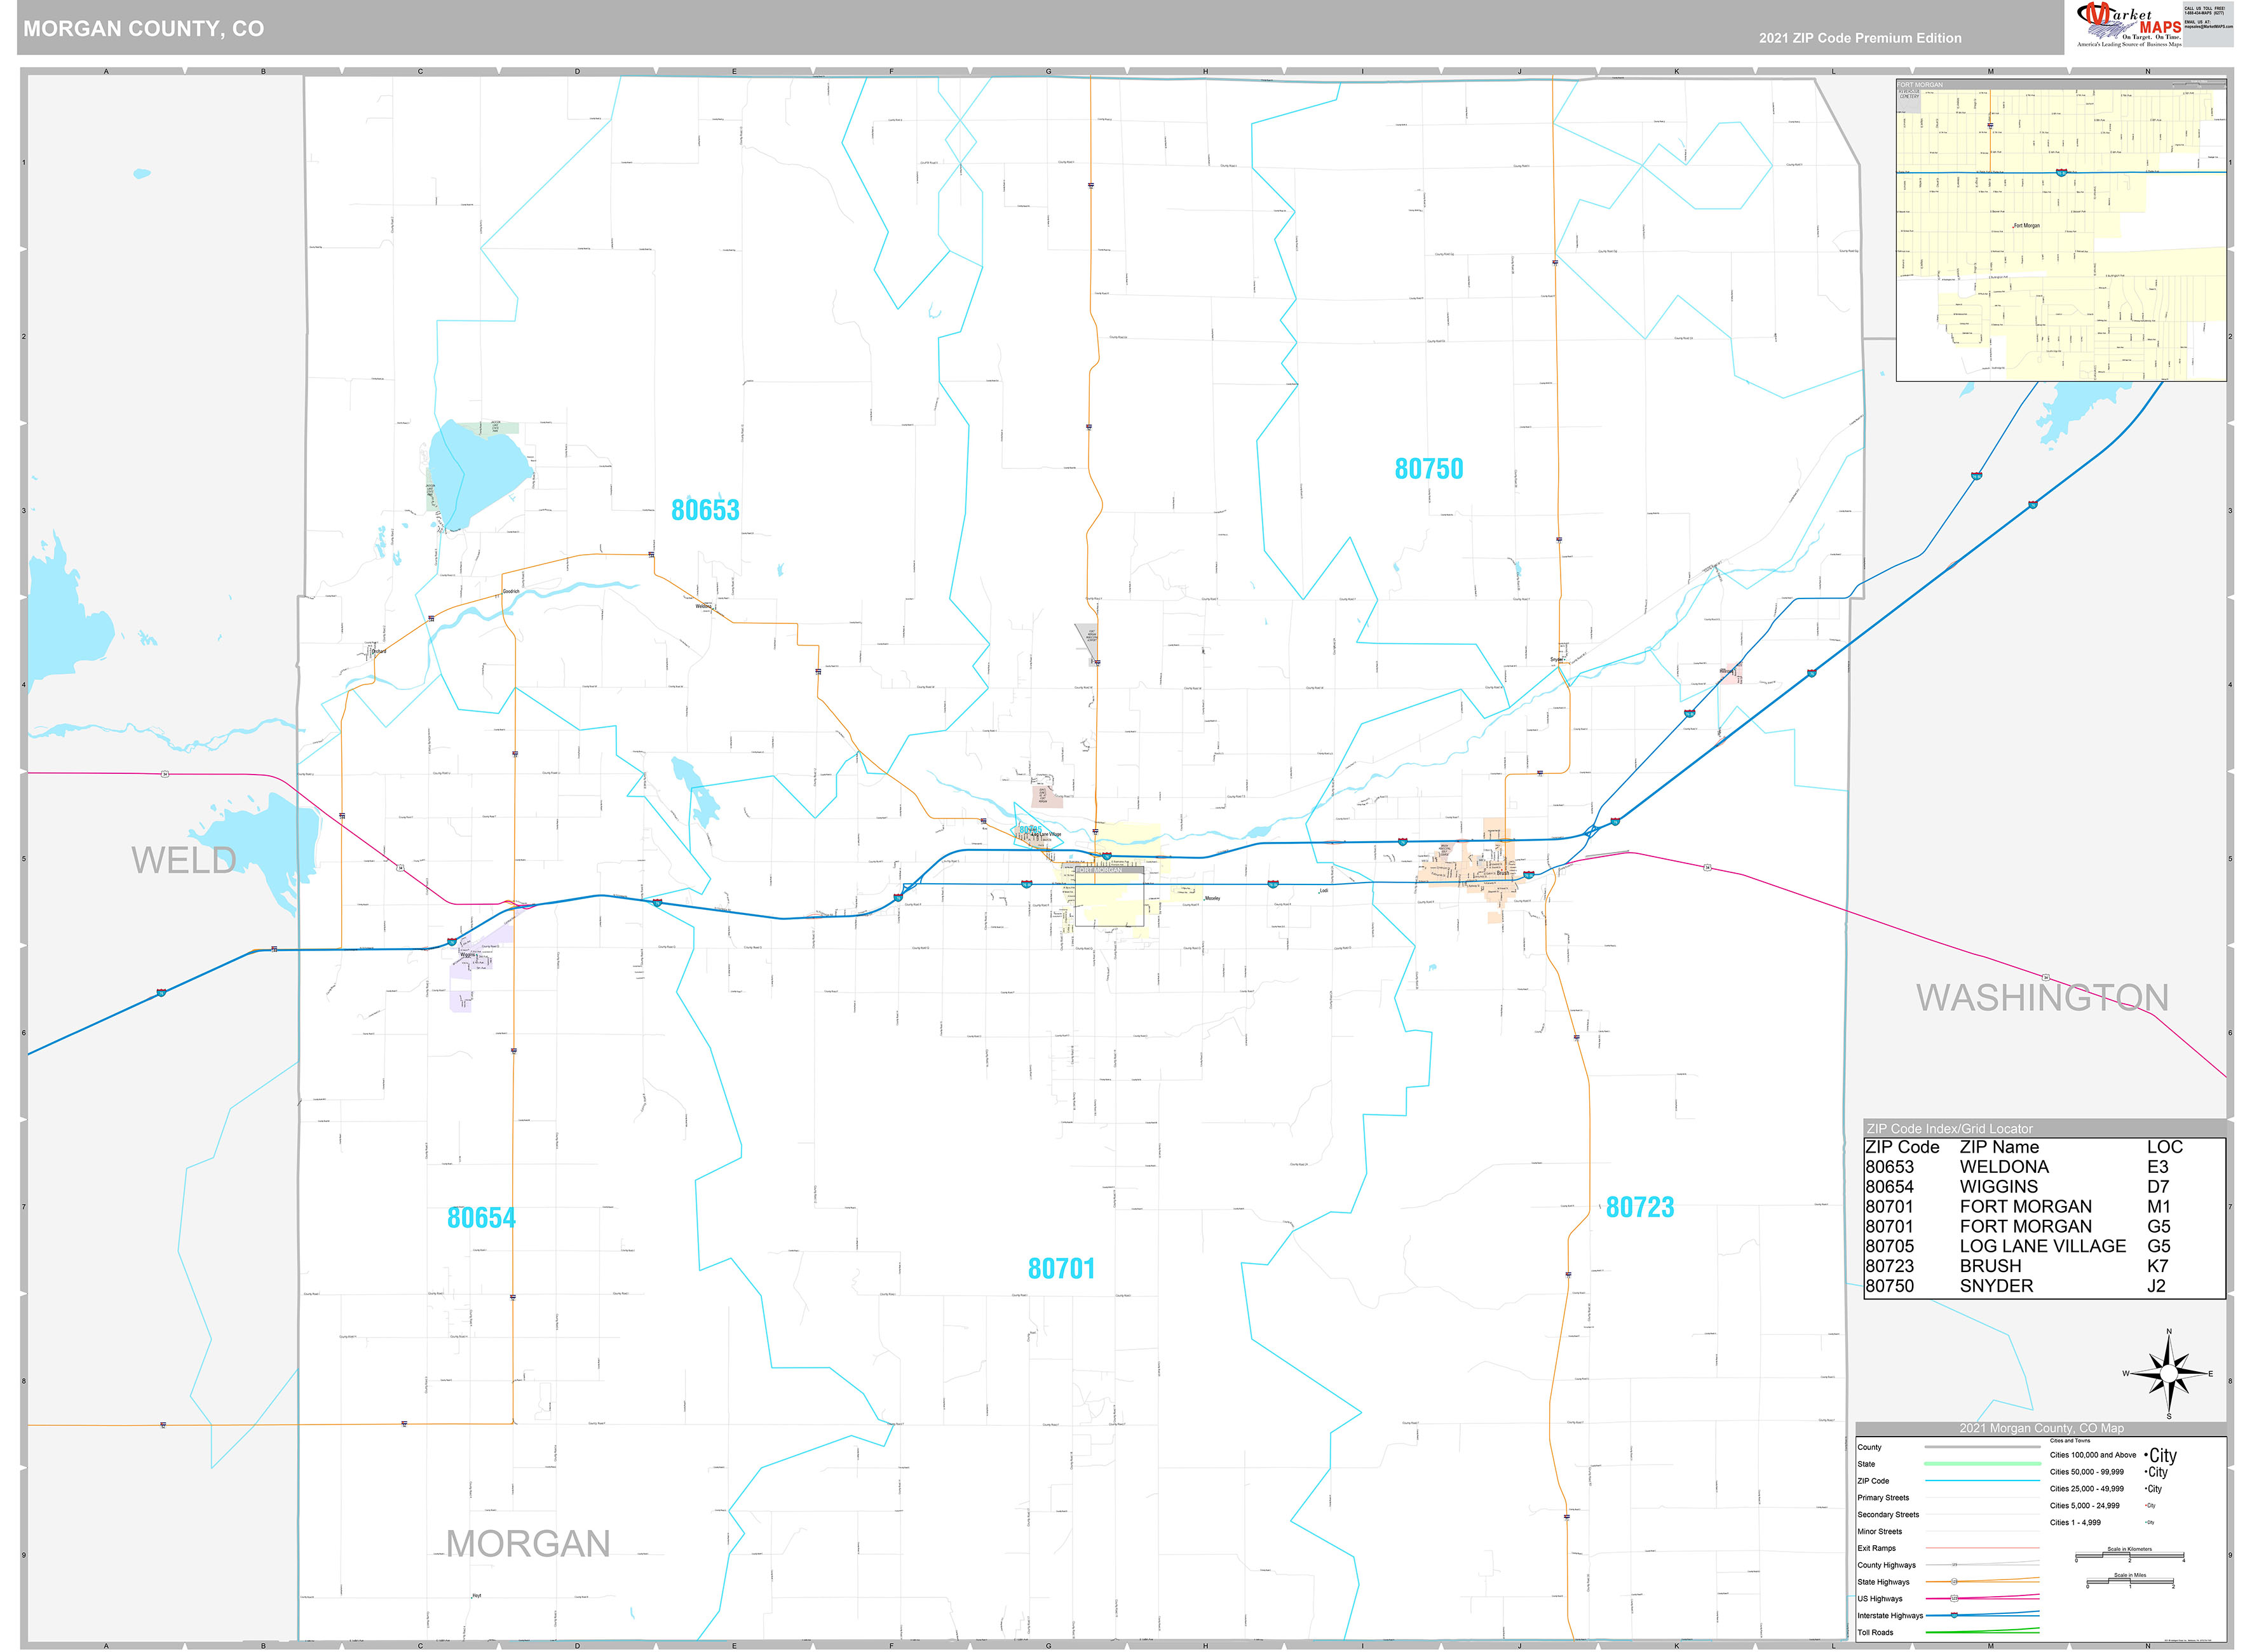 Morgan County, CO Wall Map Premium Style by MarketMAPS - MapSales.com